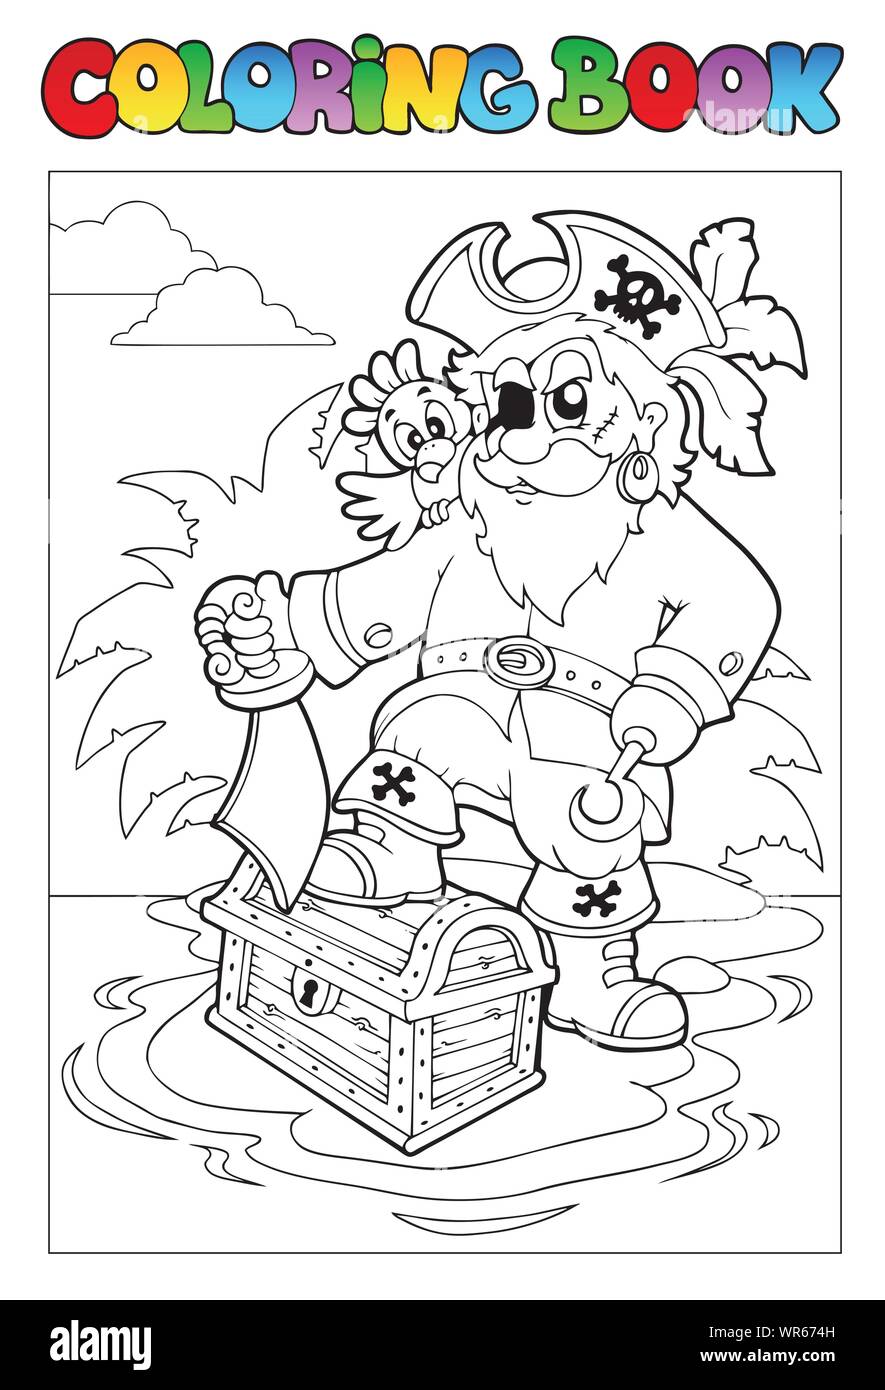 Coloring book with pirate scene 1 Stock Vector